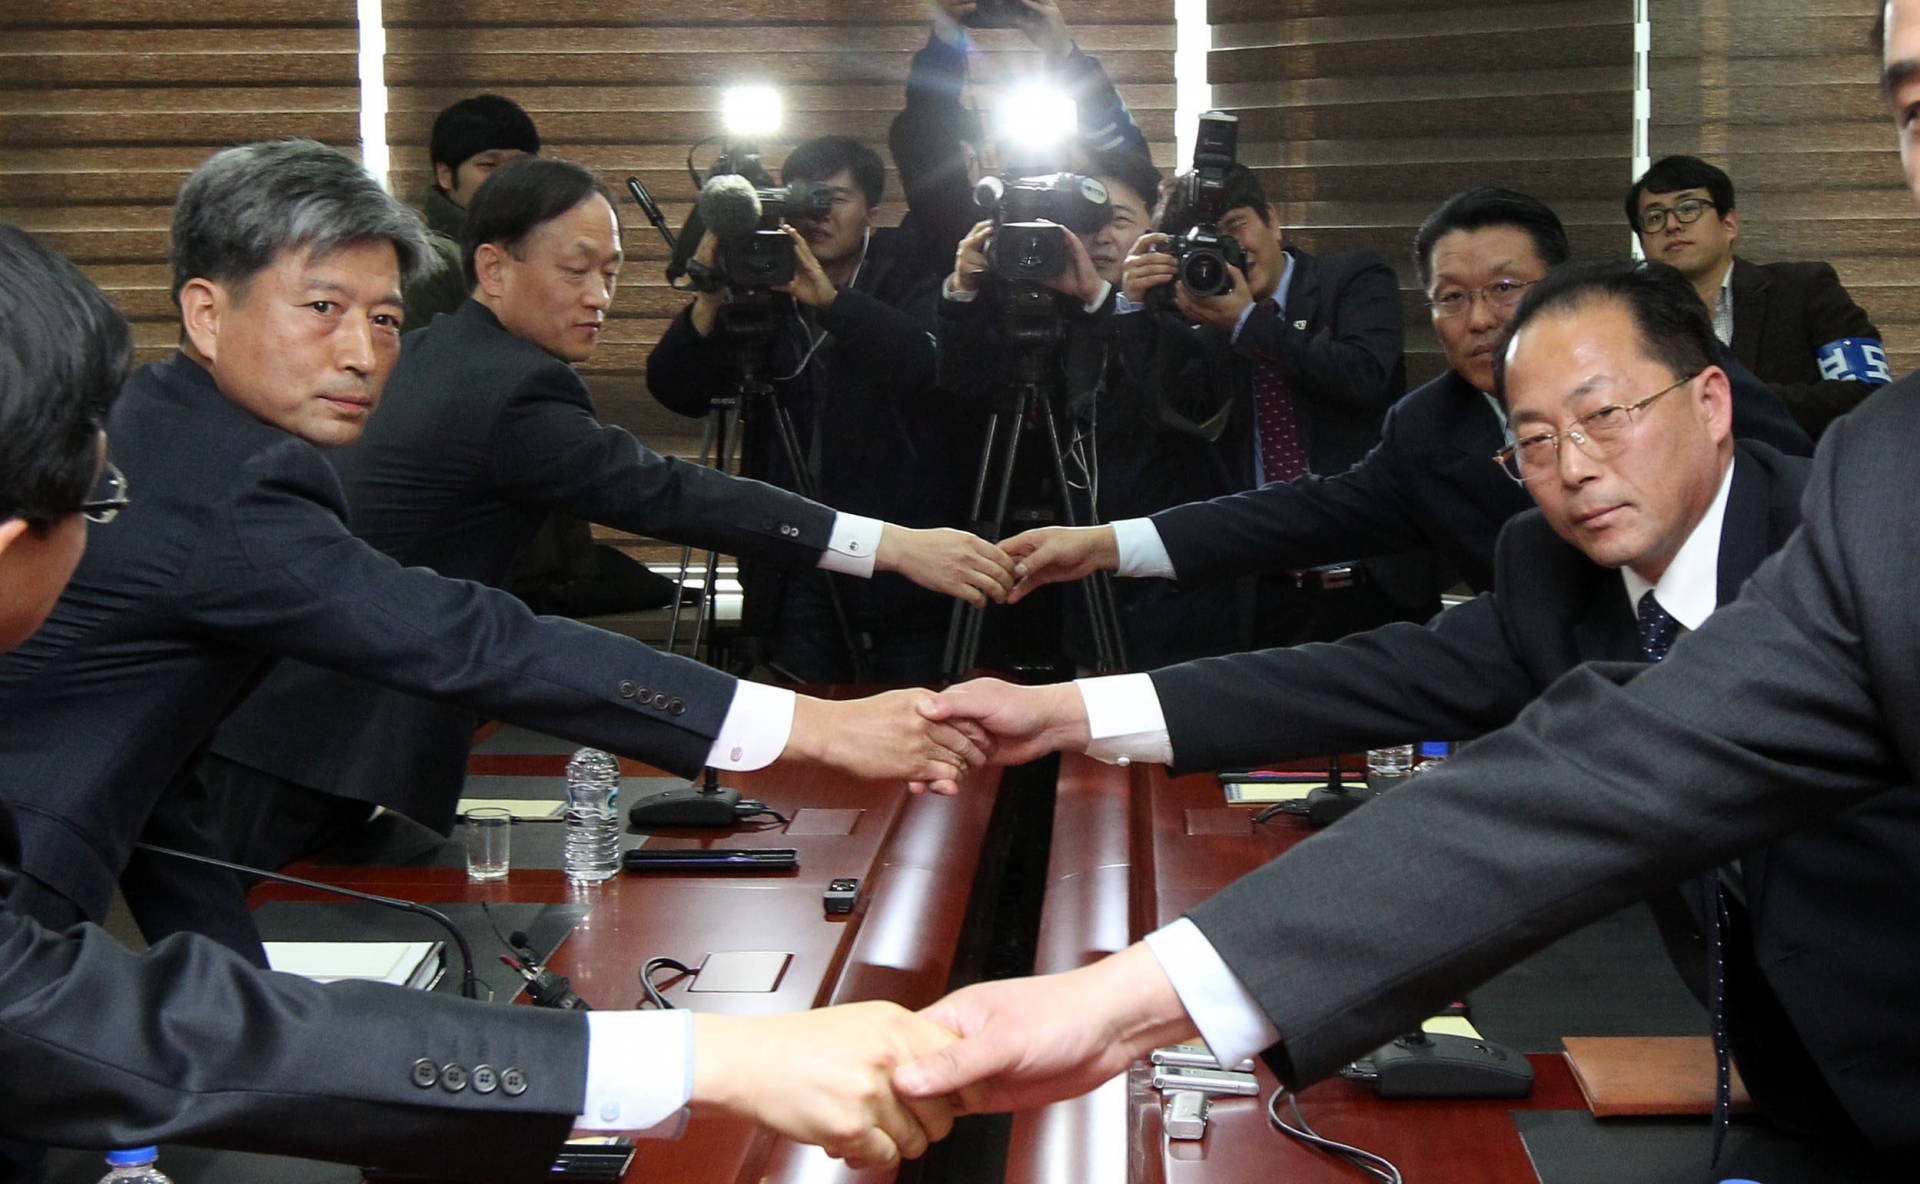 epa05064548 South and North Korean representatives to inter-Korean talks shake hands at the start of their meeting in the border city of Kaesong, North Korea, 11 December 2015. The high-level talks are part of an agreement from August for the two sides to try to ease cross-border tensions. At left is South Korea's Vice Unification Minister Hwang Boo-gi, and at right is Jon Jong-su, vice director of the secretariat of the North's Committee for the Peaceful Reunification of Korea.  EPA/YONHAP/POOL SOUTH KOREA OUT NORTH KOREA SOUTH KOREA DIPLOMACY